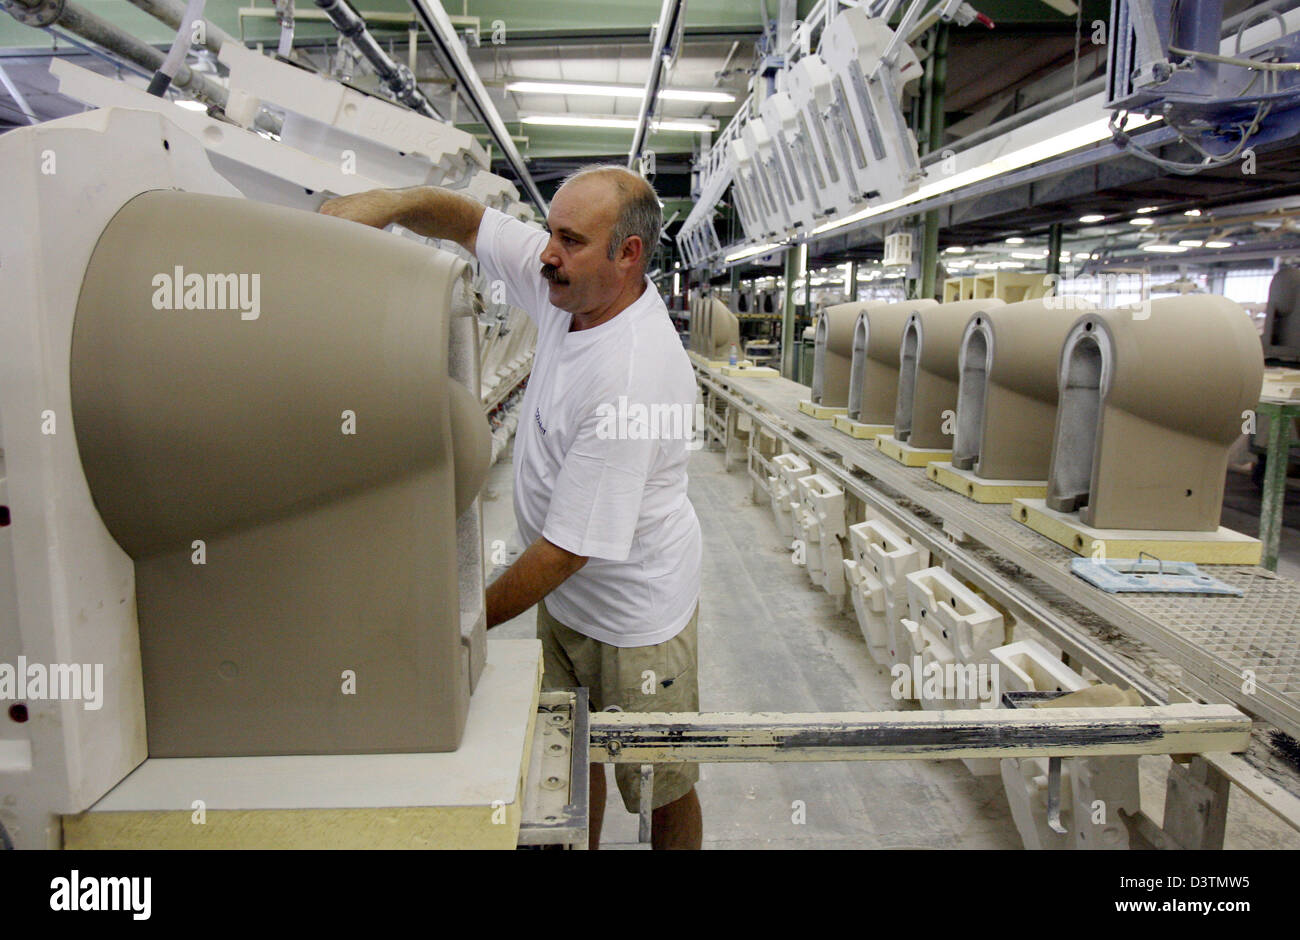 An employee of the Duravit AG takes a toilet seat from its casting mould in Hornberg, Germany, 15 September 2006. Duravit AG produces sanitary ceramics, bath room accessories and bath room furniture. Photo: Patrick Seeger Stock Photo